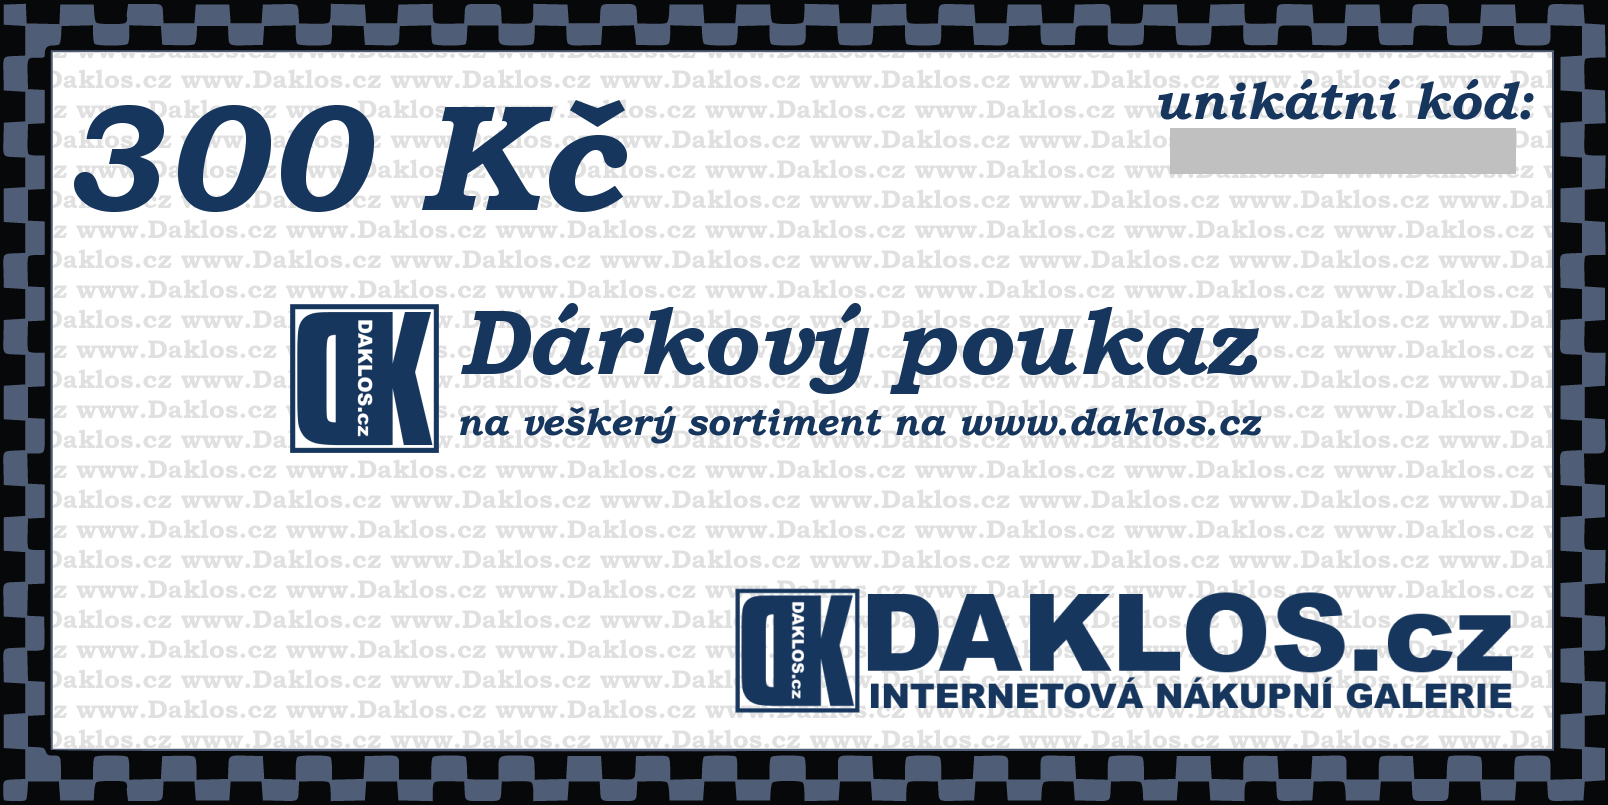 http://www.daklos.cz/index.php?id_product=1459&controller=product